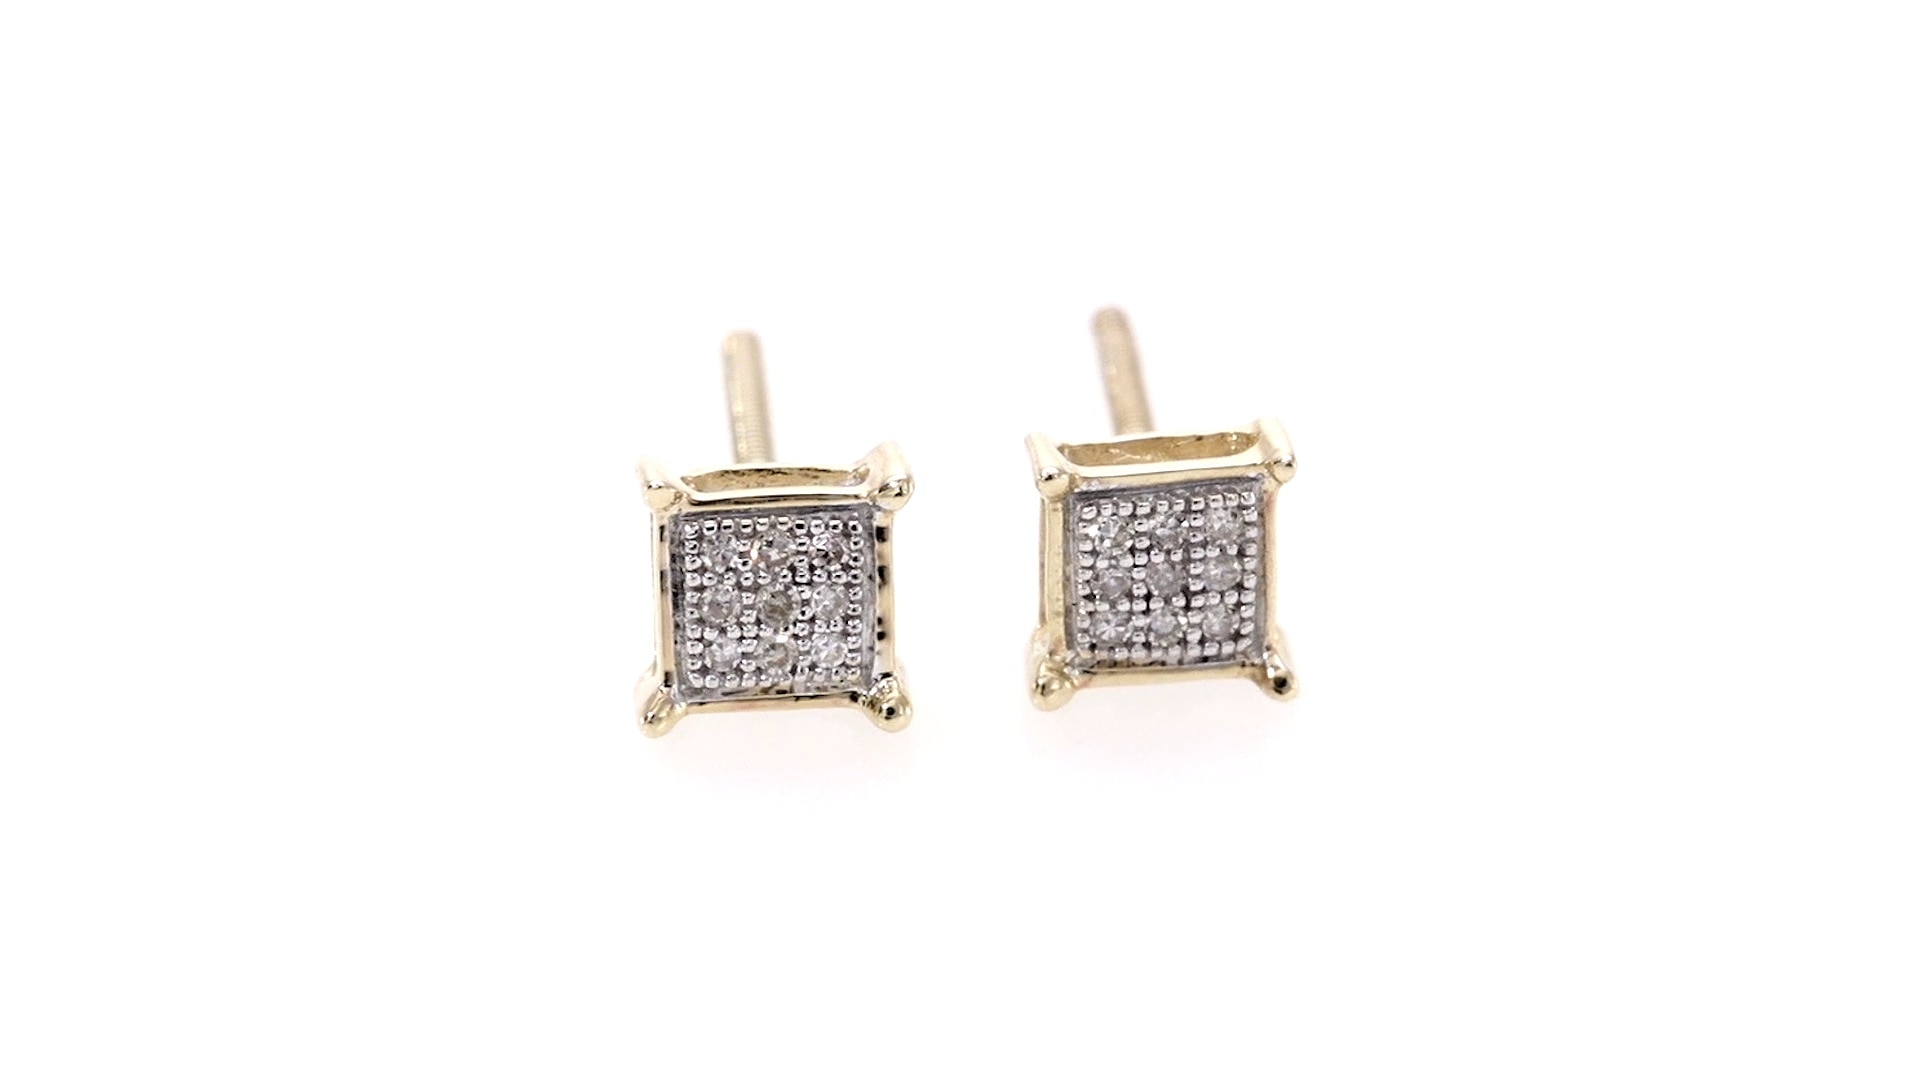 Square Earrings - A Modern Twist To Classic Jeweler